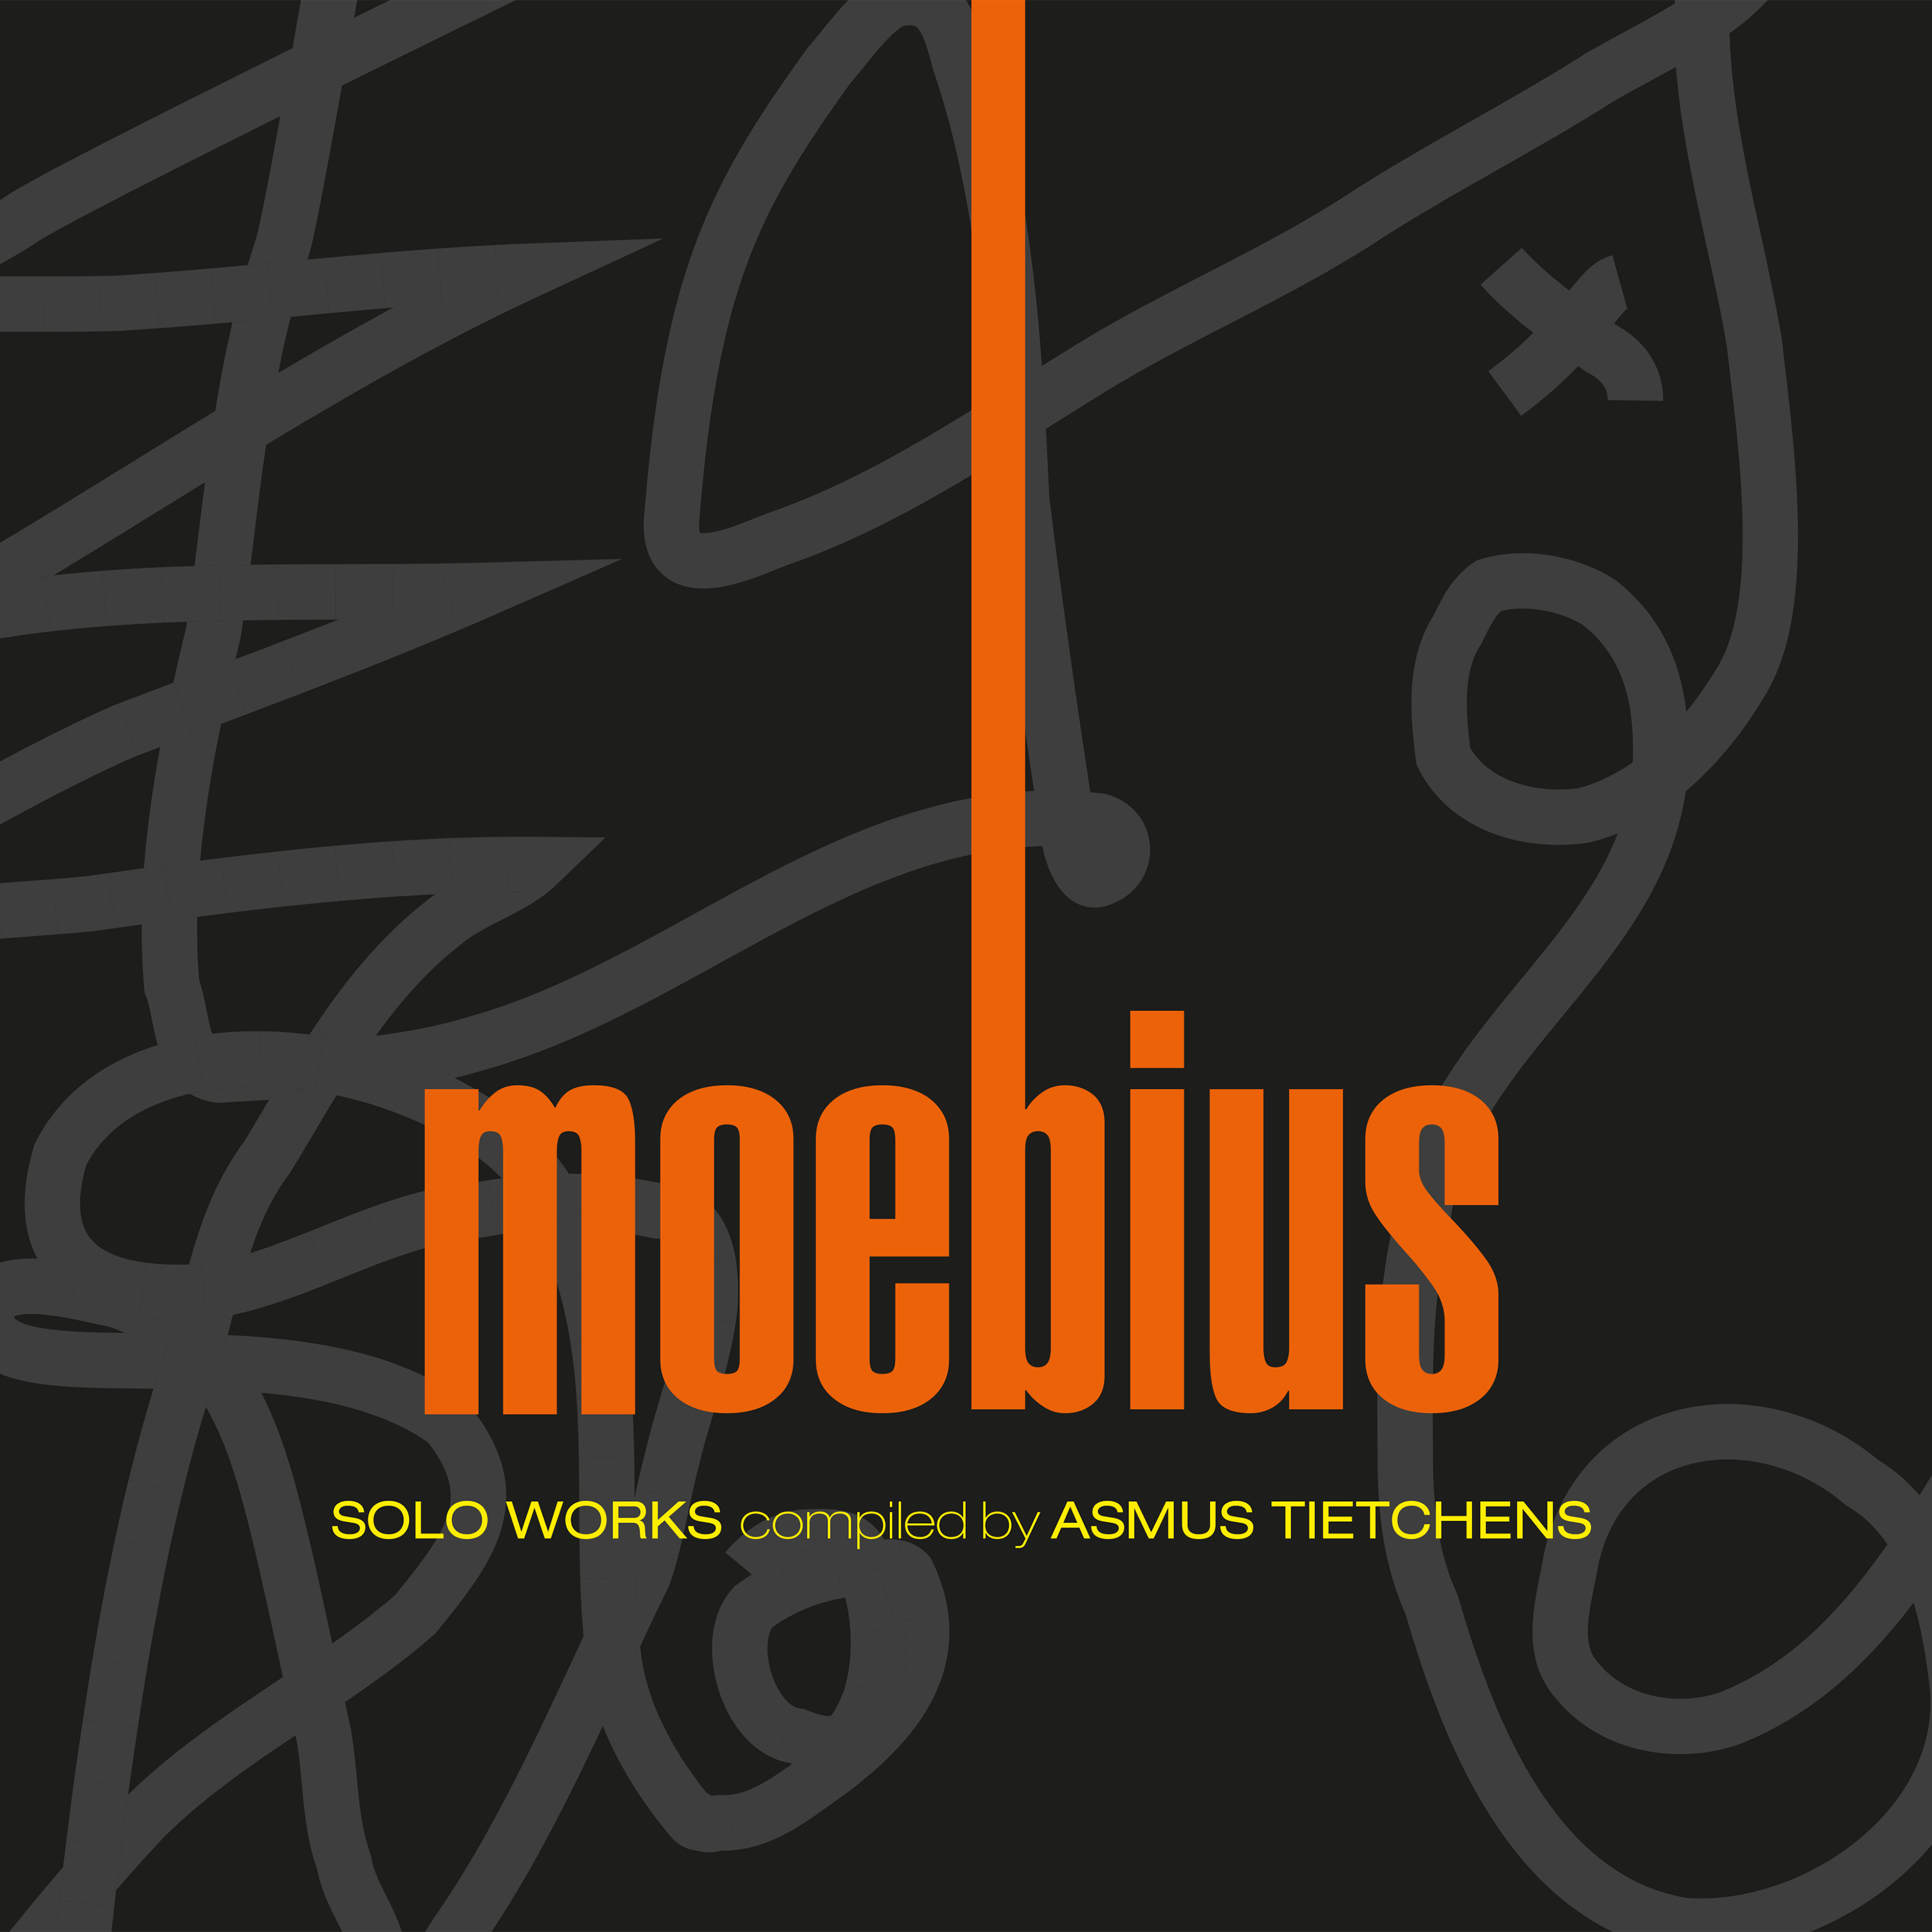 SOLO WORKS (COMPILED BY ASMUS TIETCHENS)